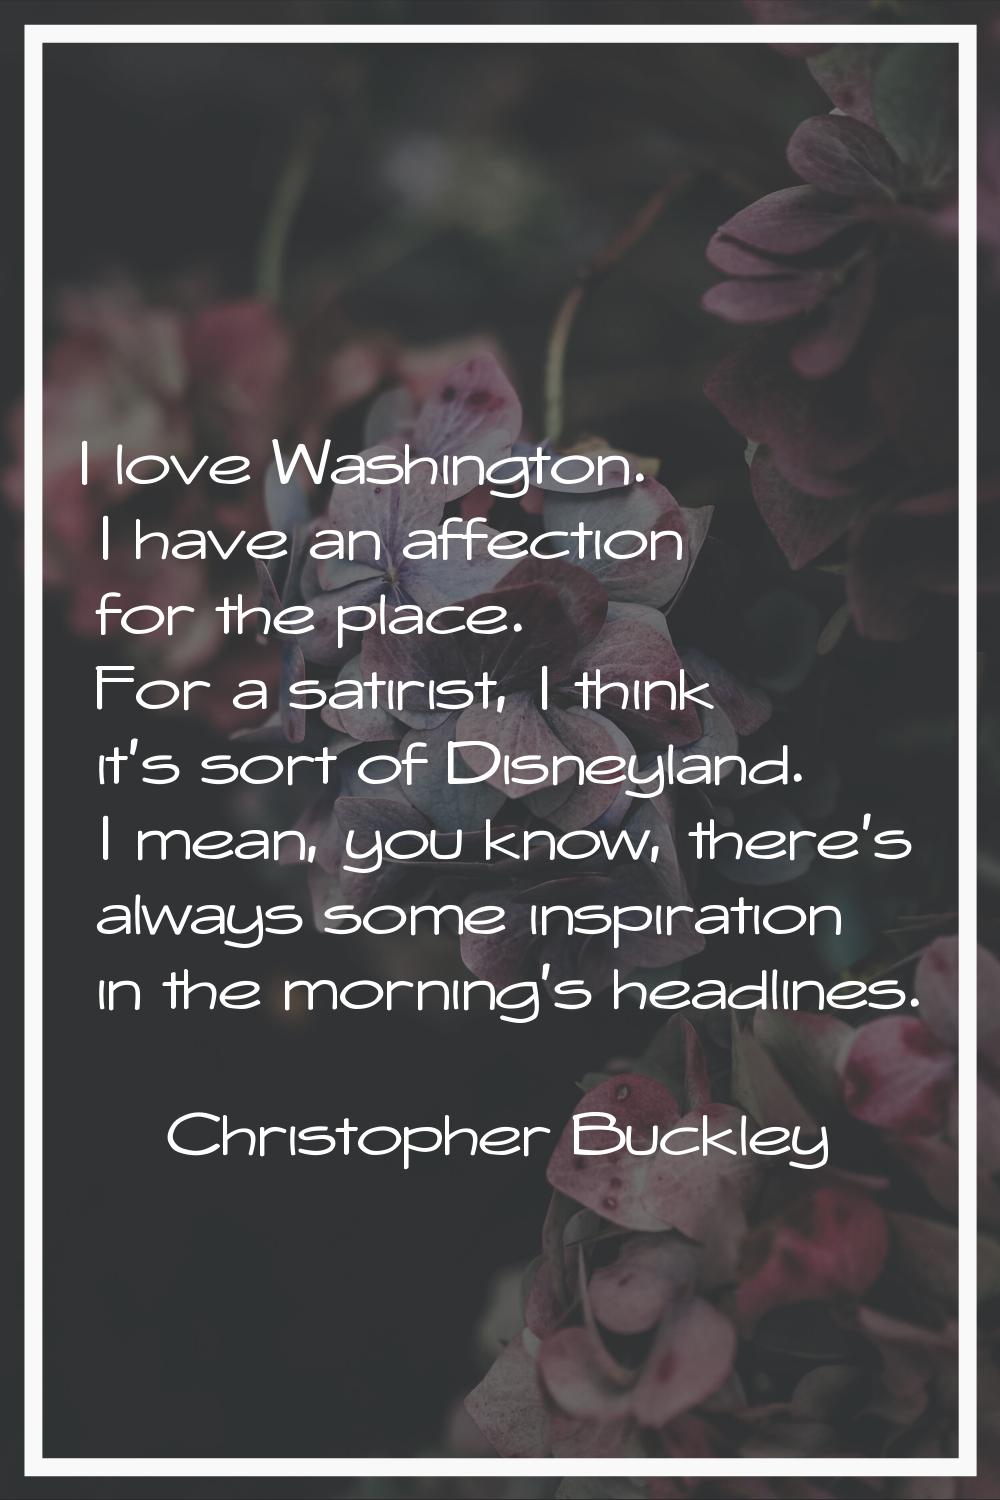 I love Washington. I have an affection for the place. For a satirist, I think it's sort of Disneyla